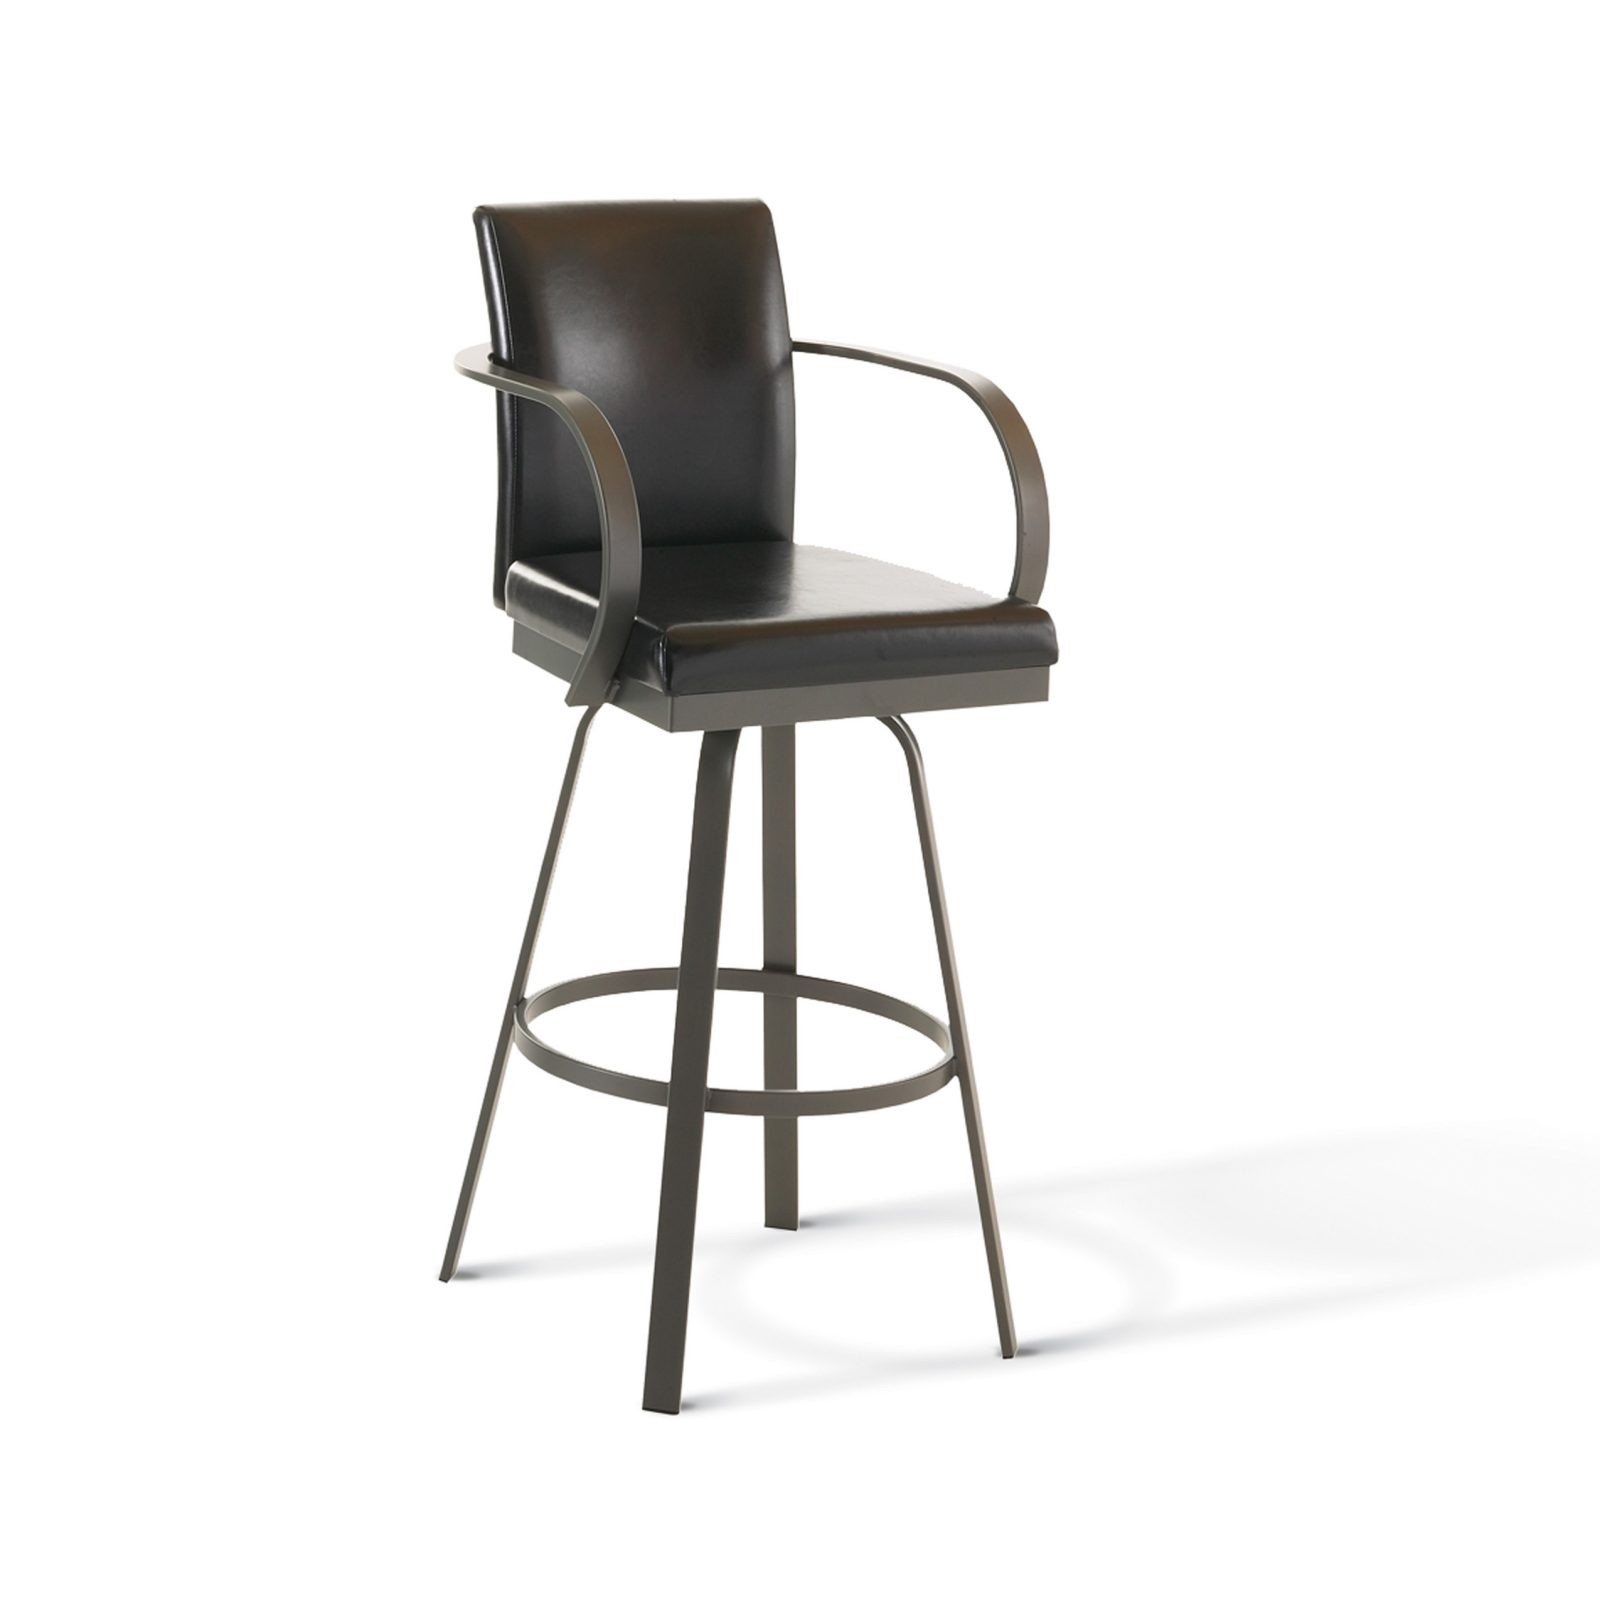 Metal Finish: 57 Metallo • Seat and Back Covering: 16 Shadow (discontinued)